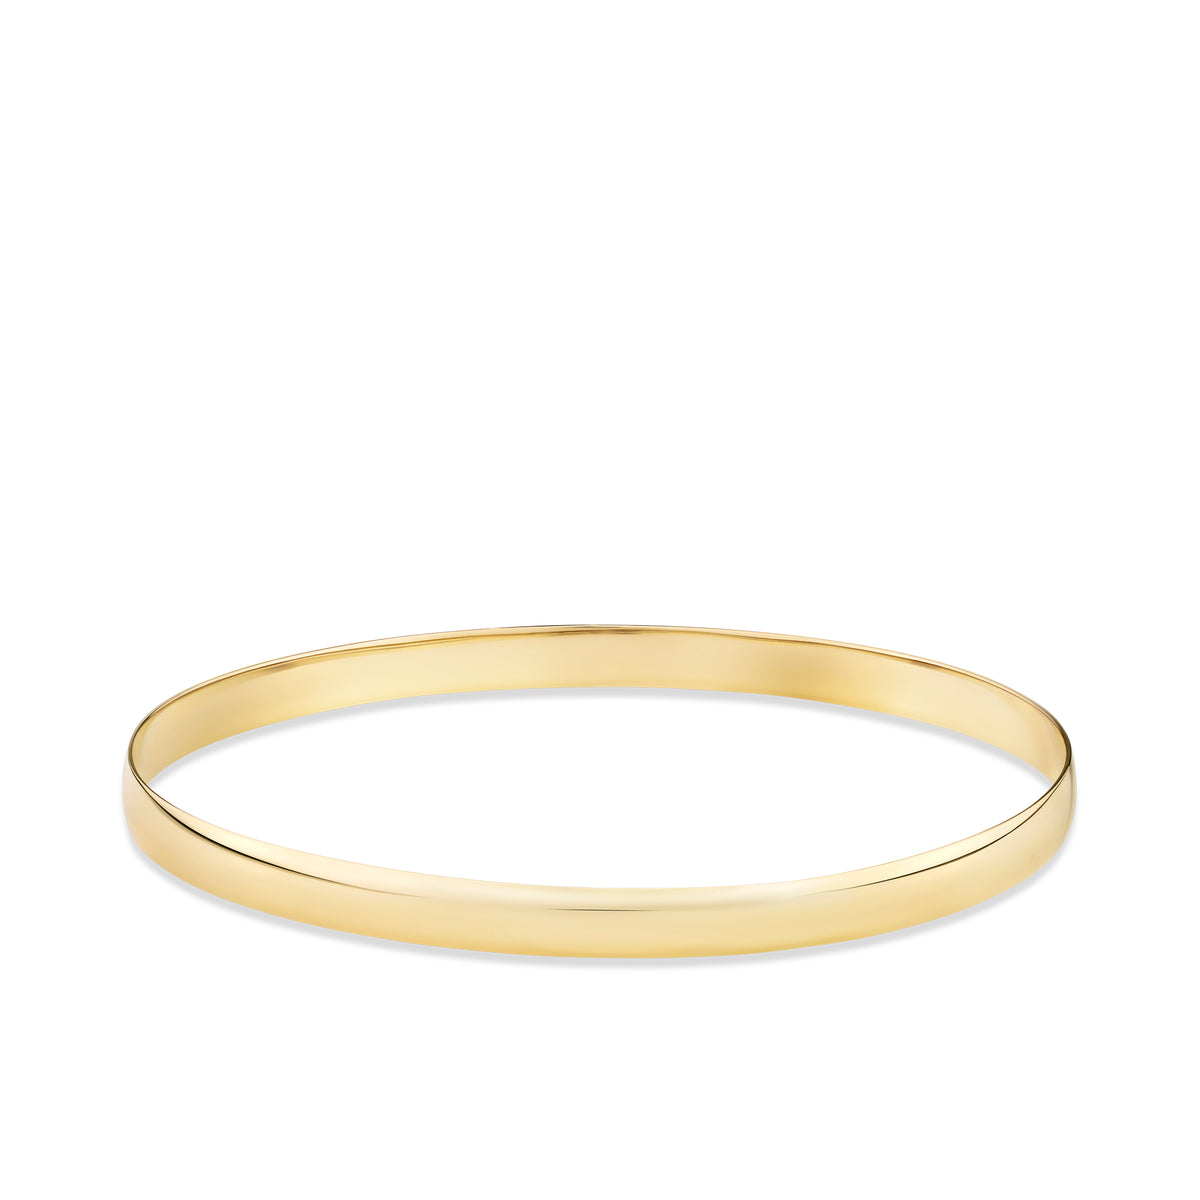 Solid Round Bangle in 9ct Yellow Gold